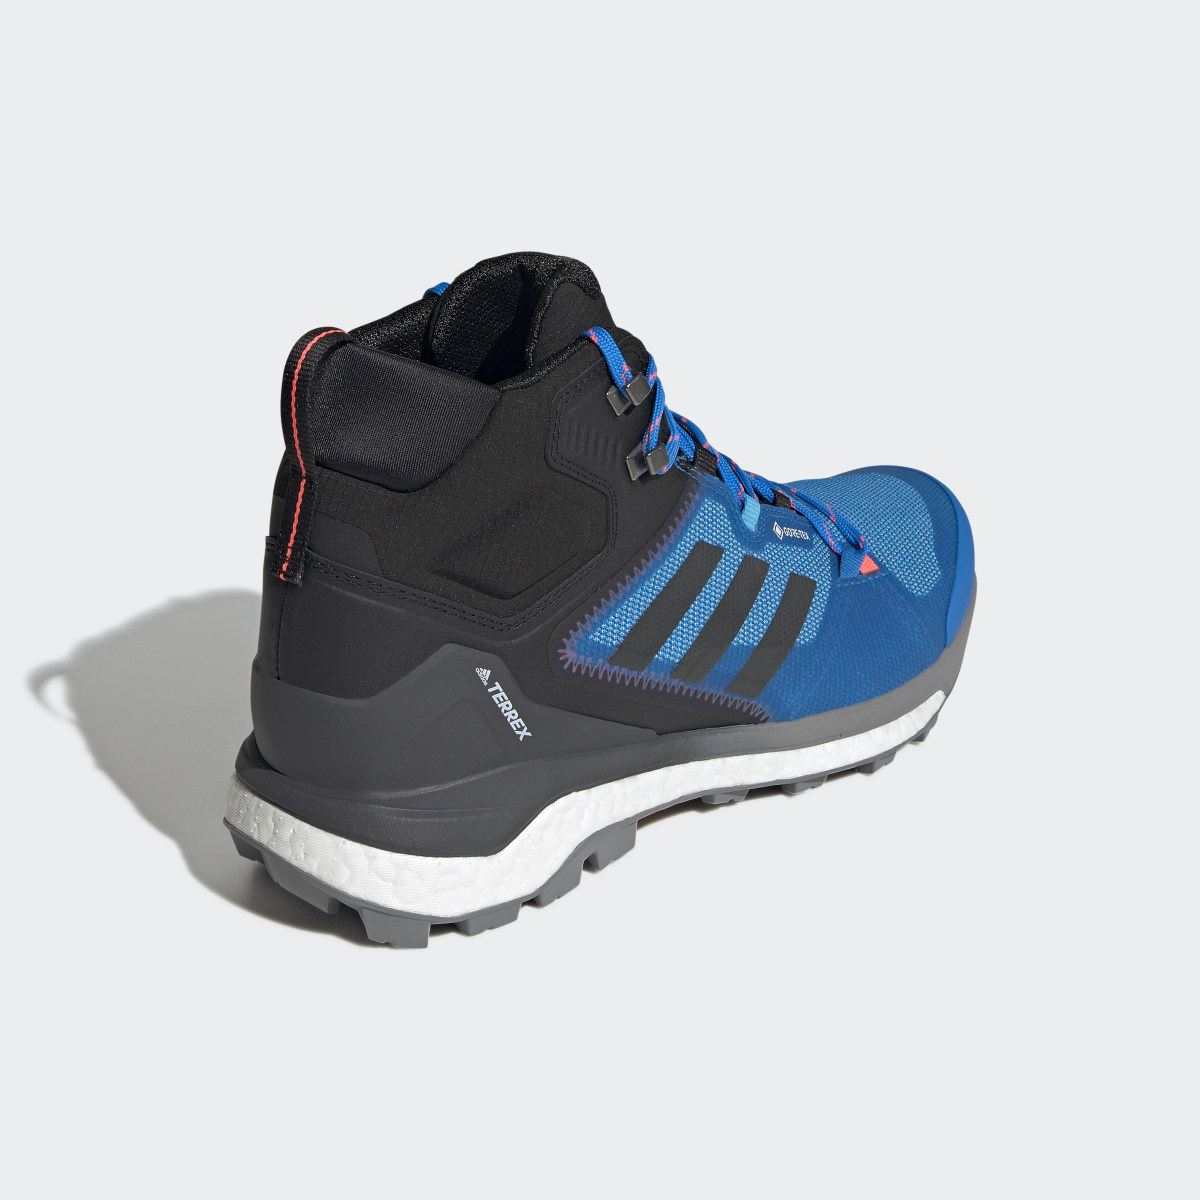 Adidas TERREX Skychaser 2 Mid GORE-TEX Hiking Shoes. 12